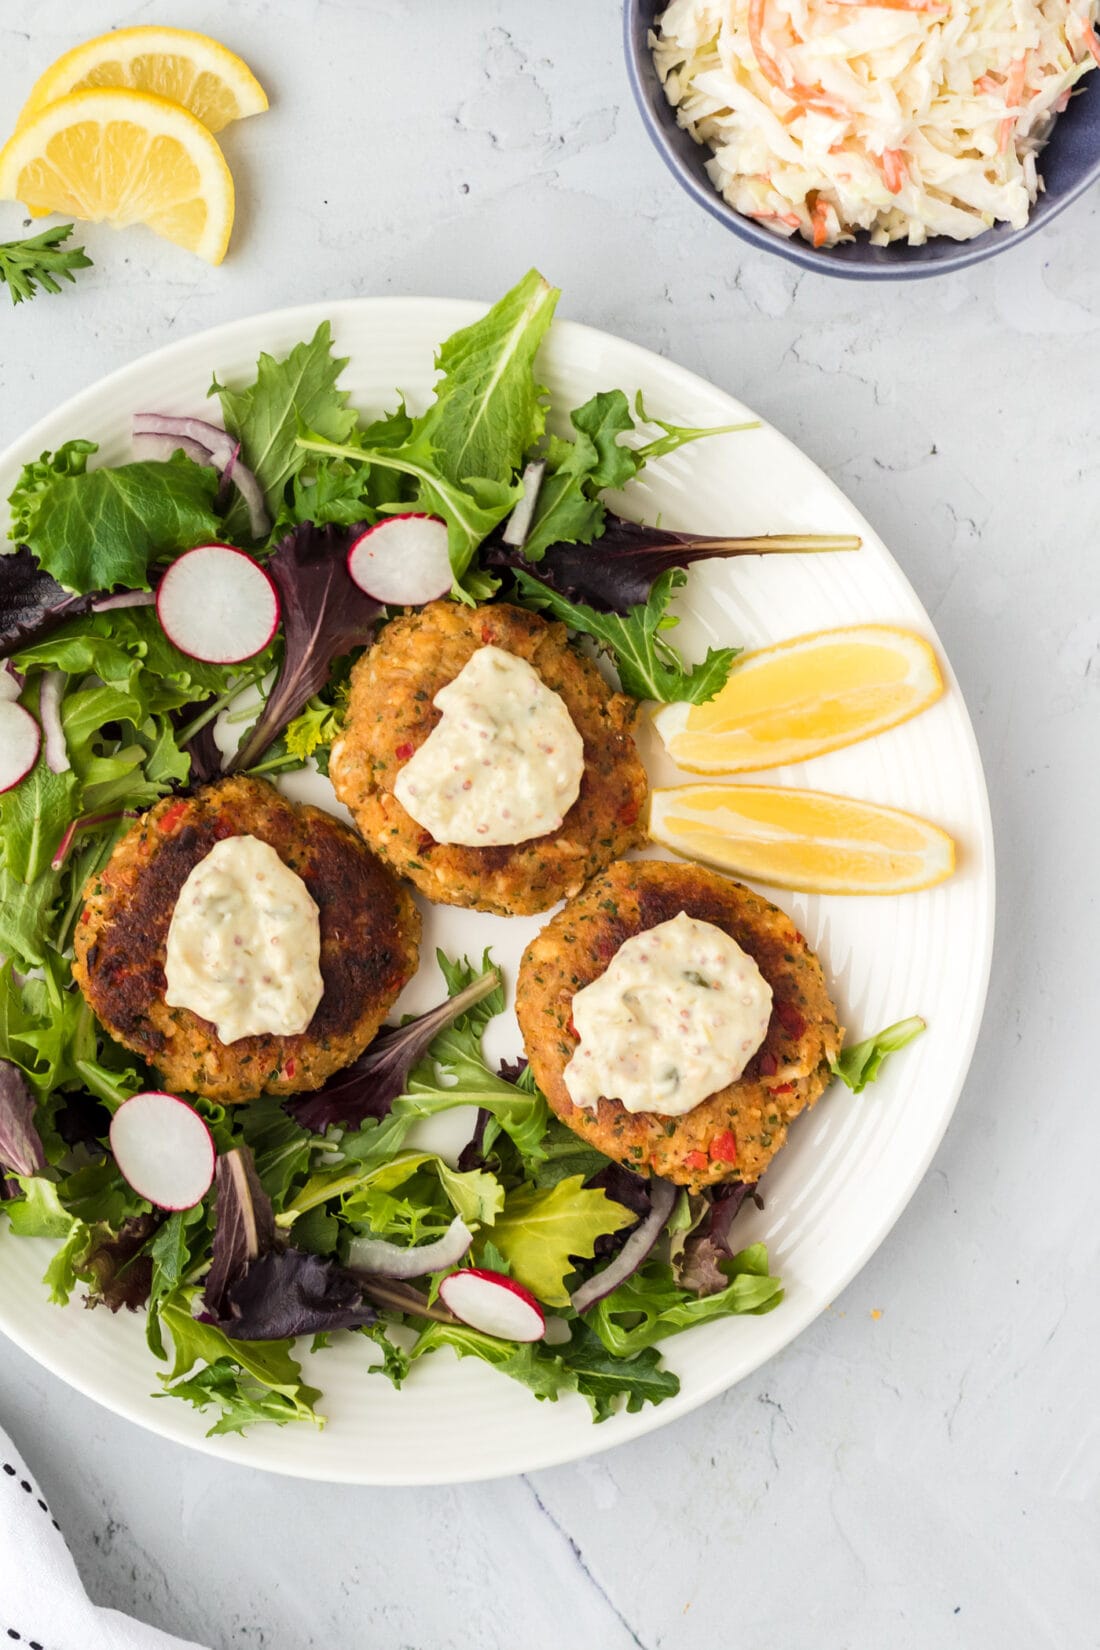 Crab Cakes with greens